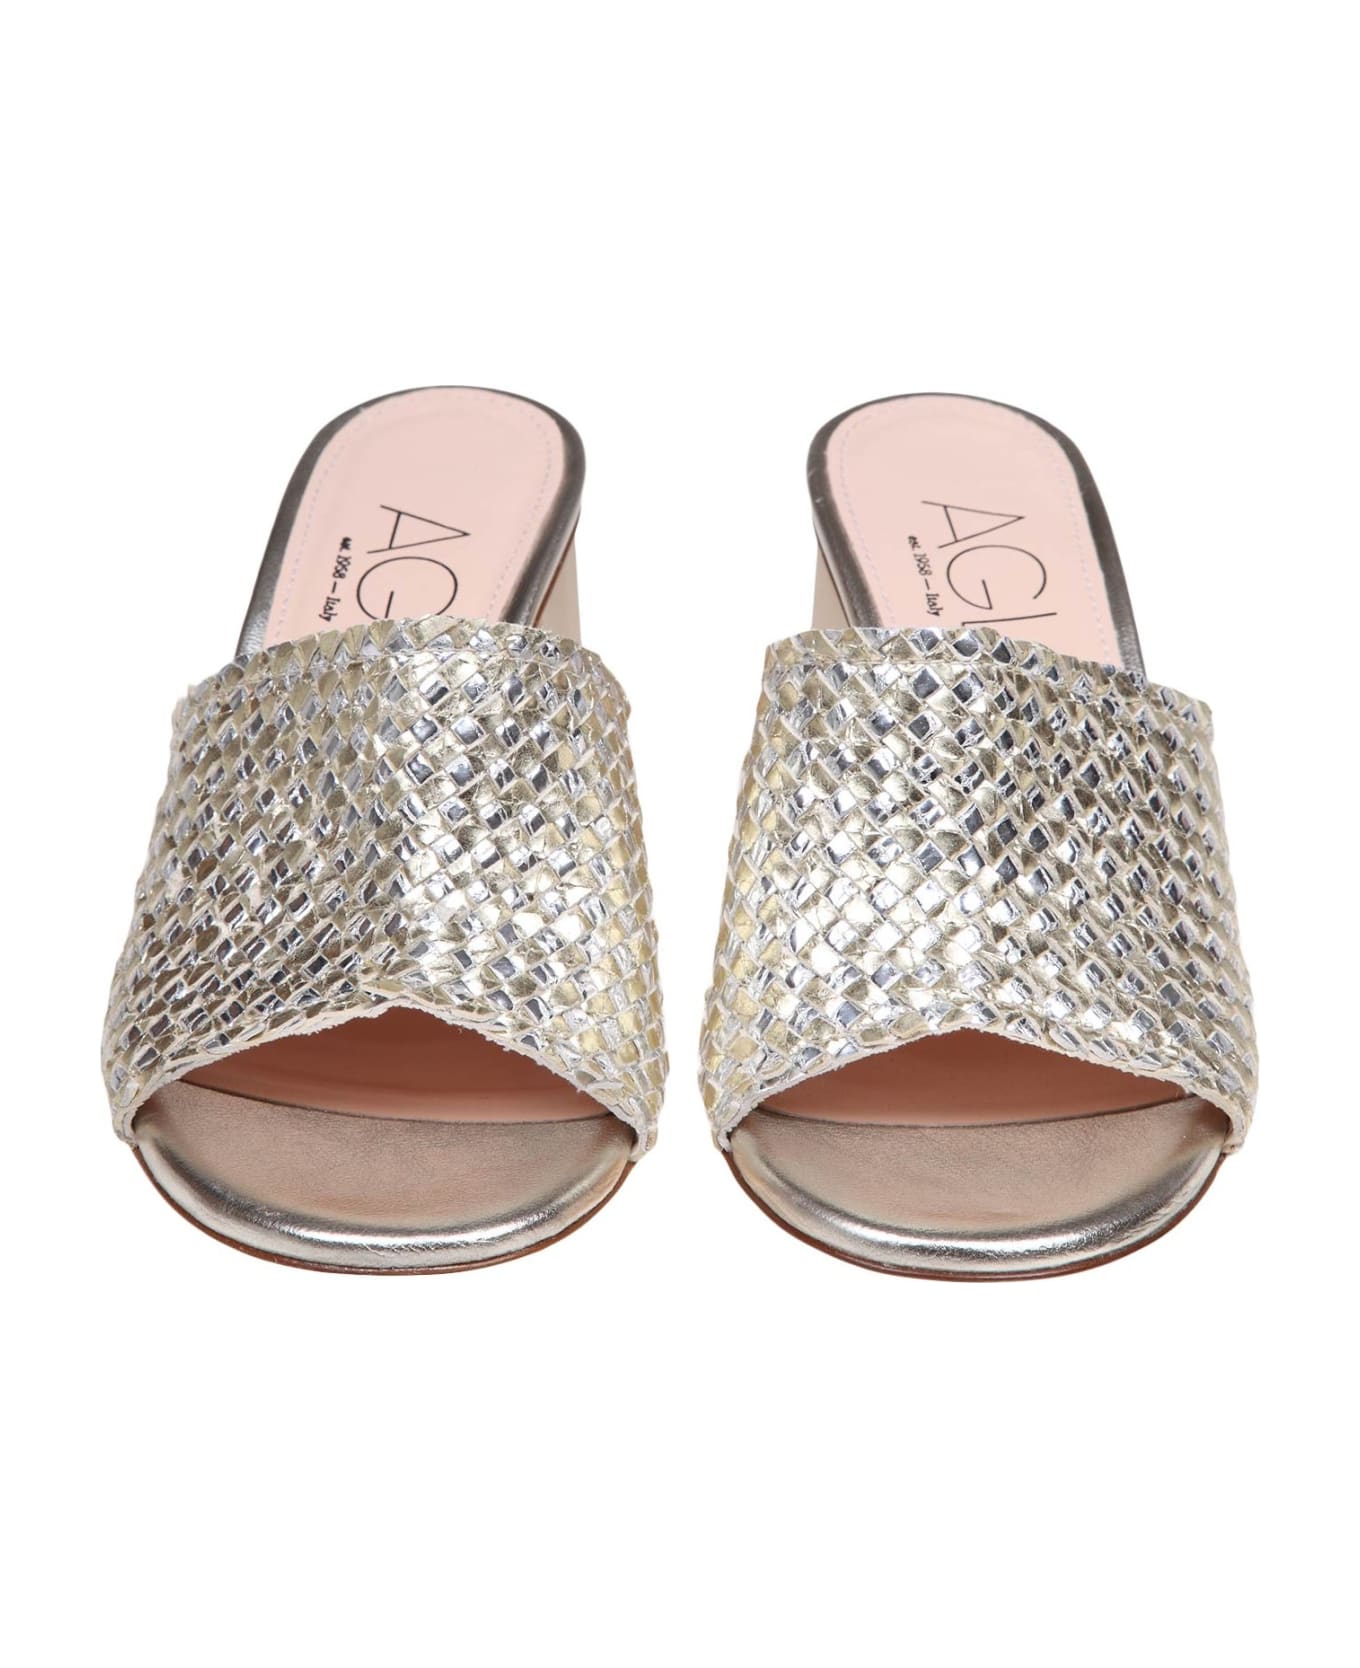 AGL Dorica Slides In Silver And Gold Woven Leather - Silver サンダル